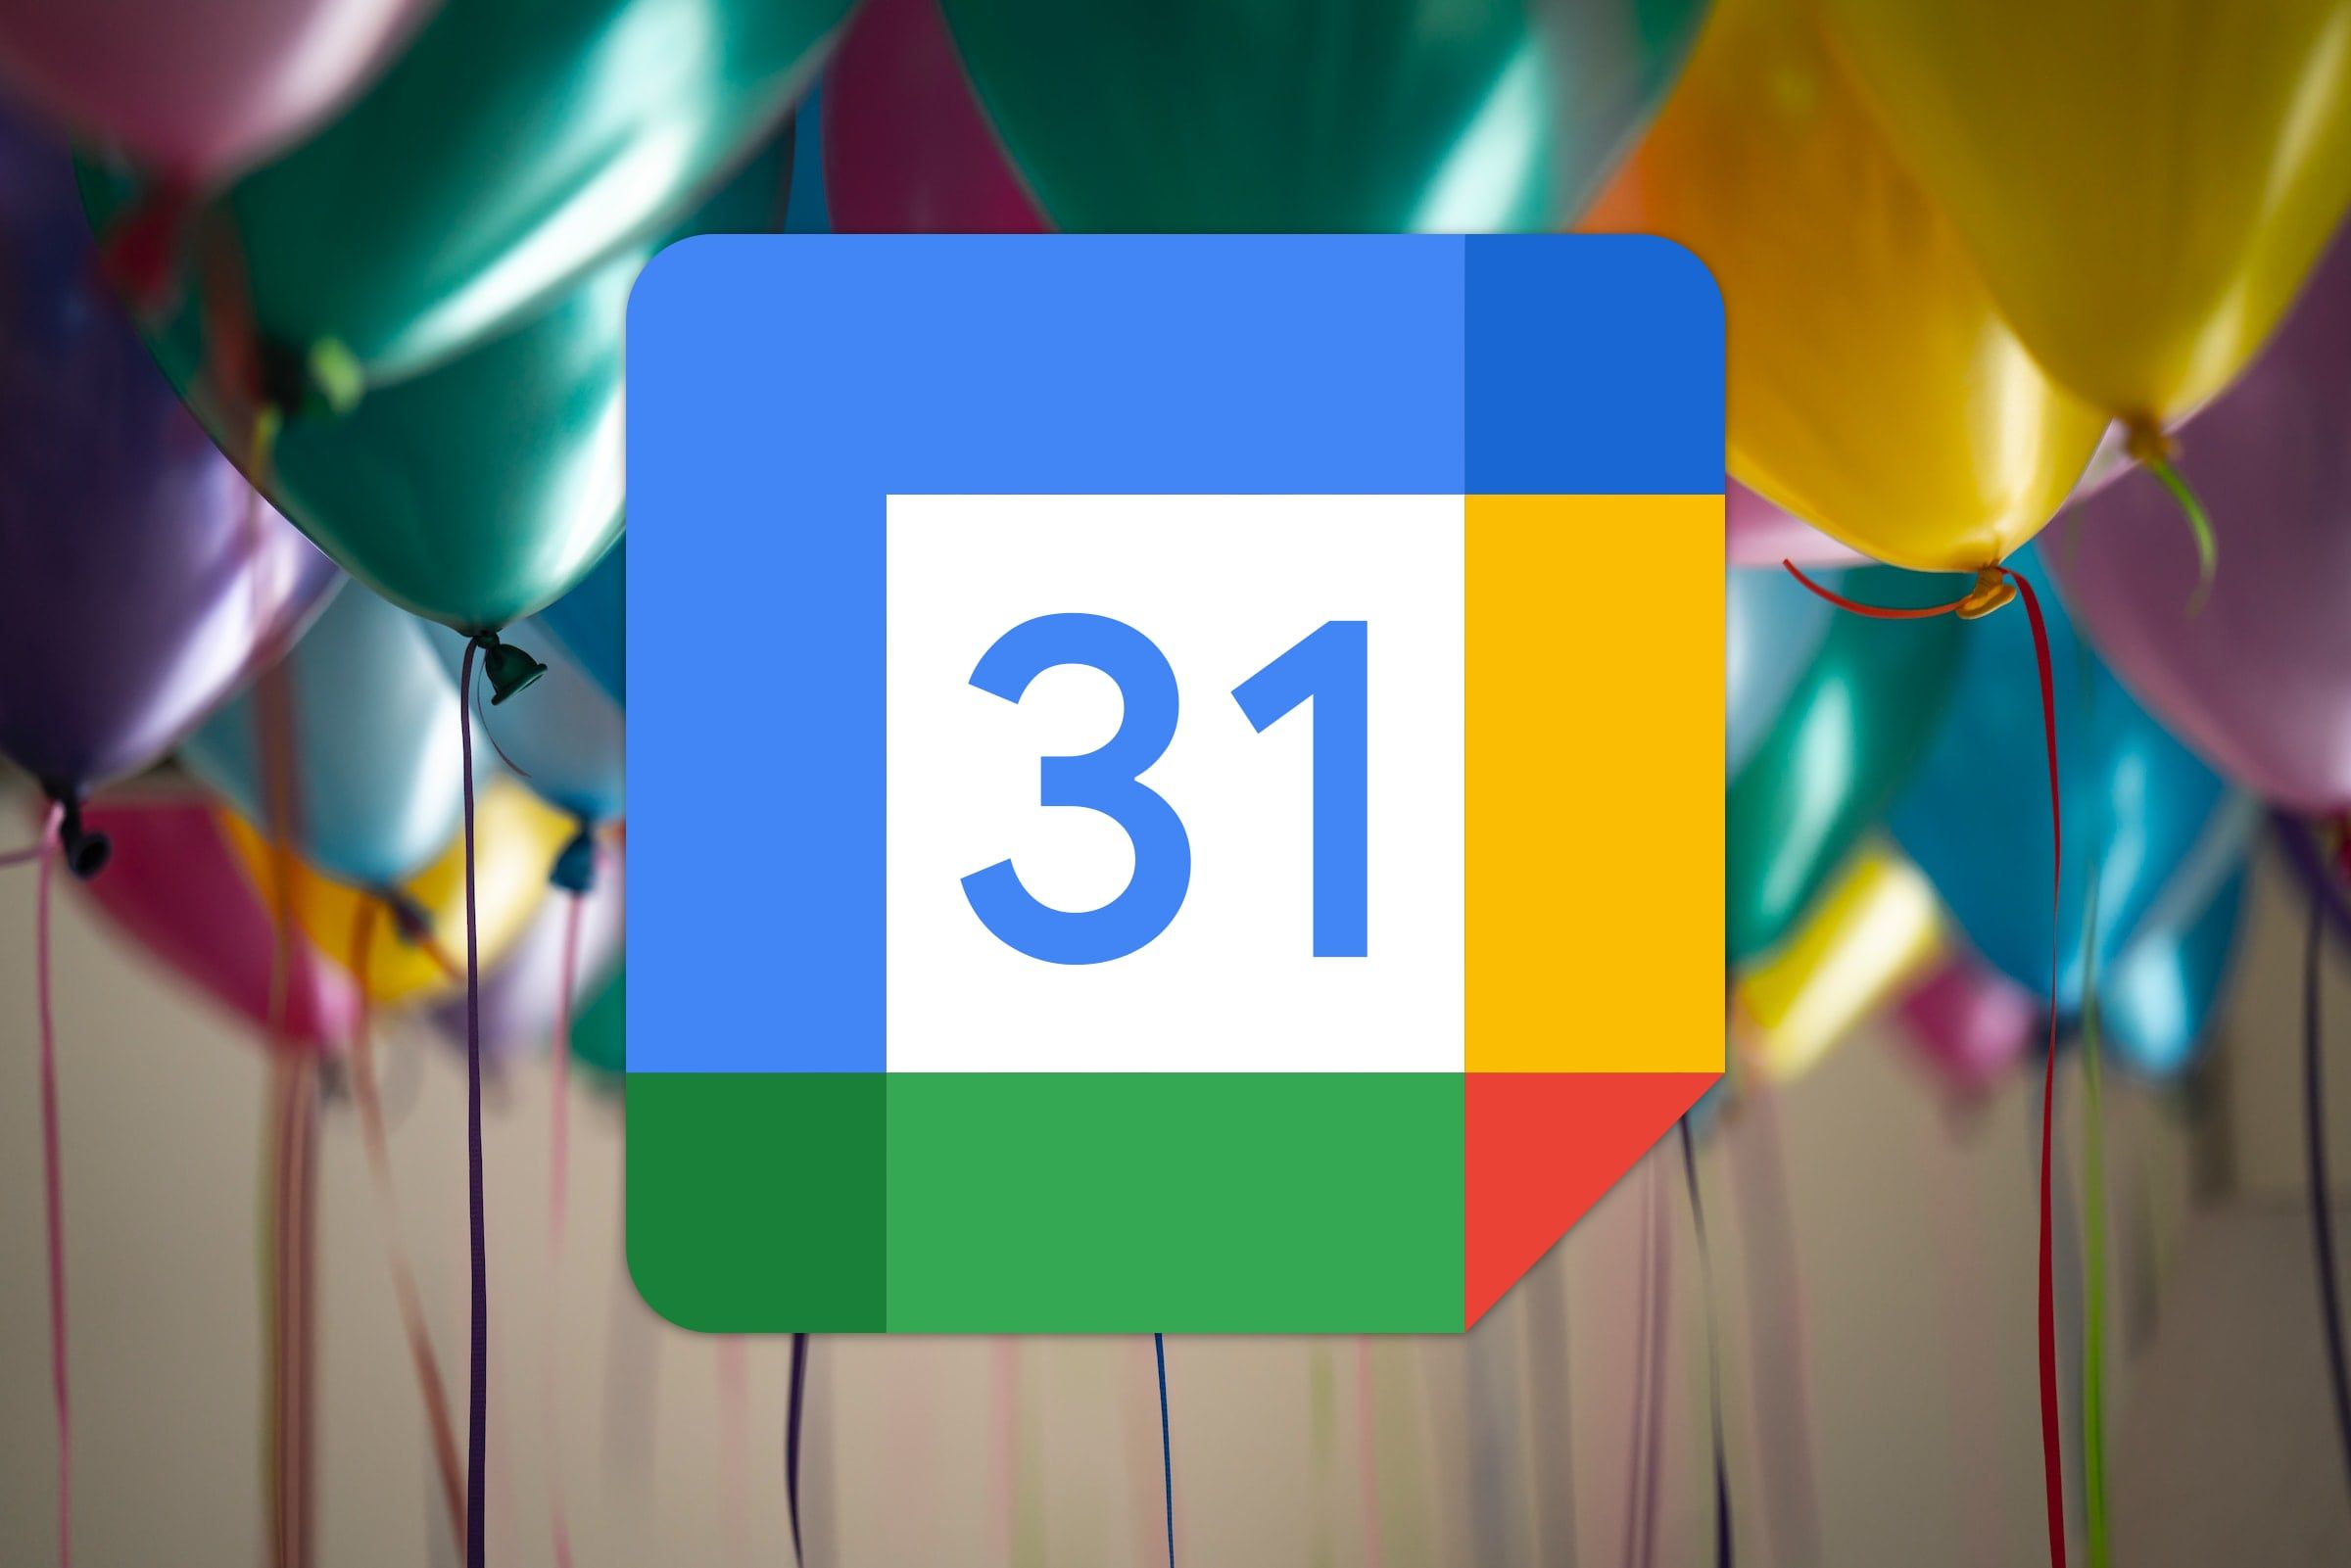 The Google Calendar logo with party baloons in the background